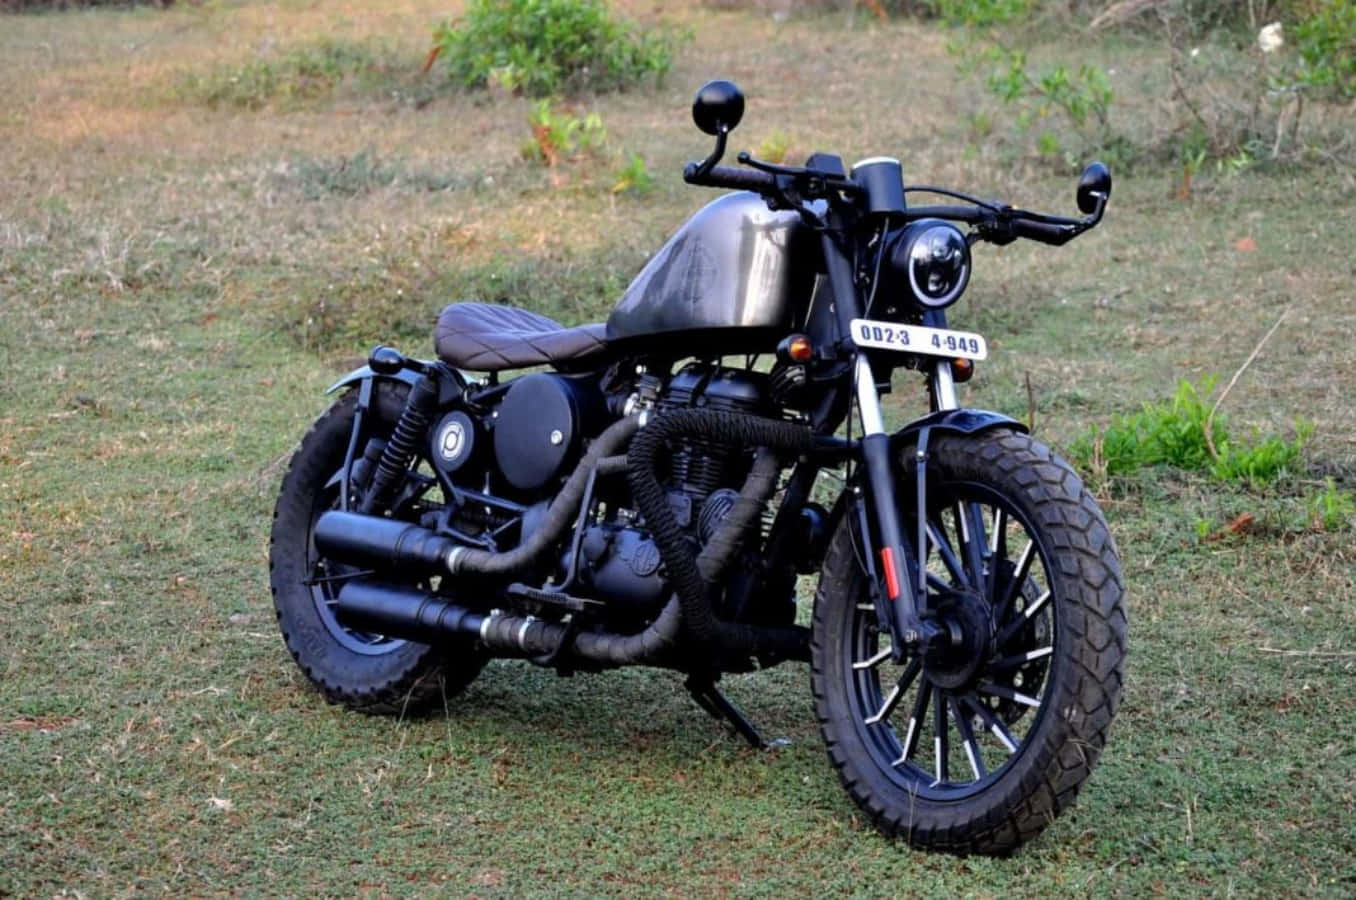 Download Modified Dev 350 Royal Enfield Pictures | Wallpapers.com